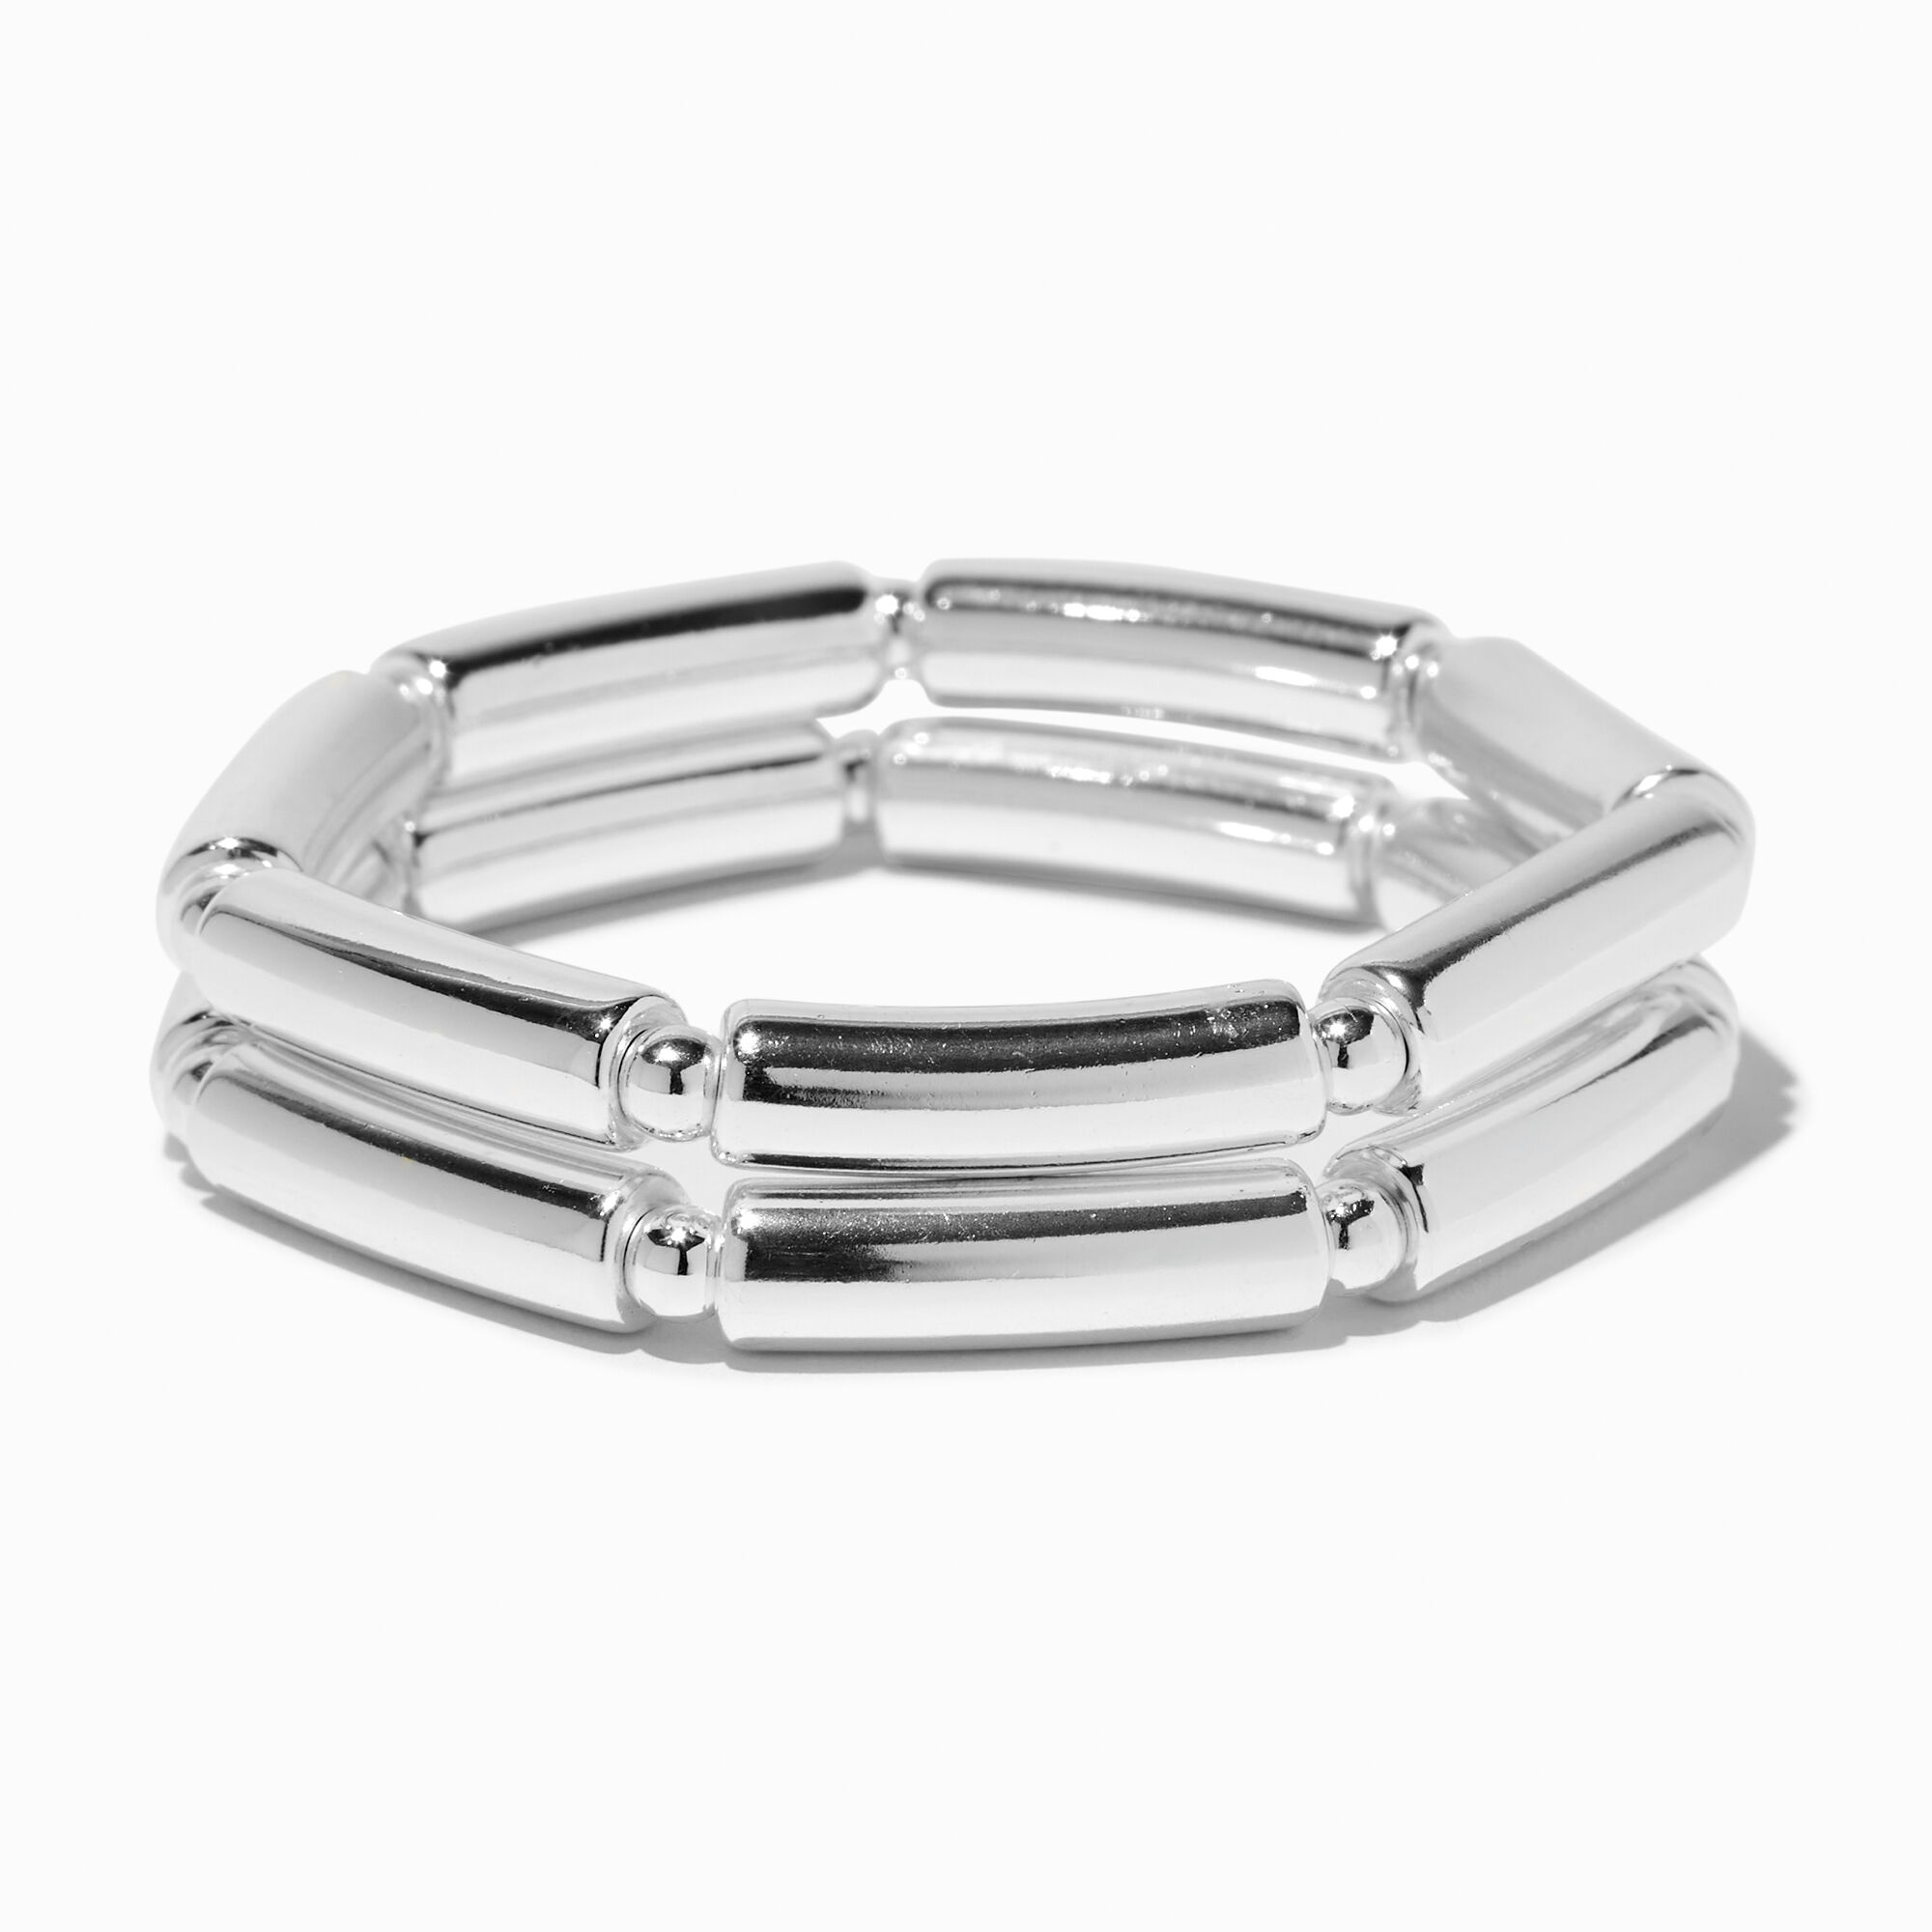 View Claires Tone Macaroni Stretch Bracelets 2 Pack Silver information